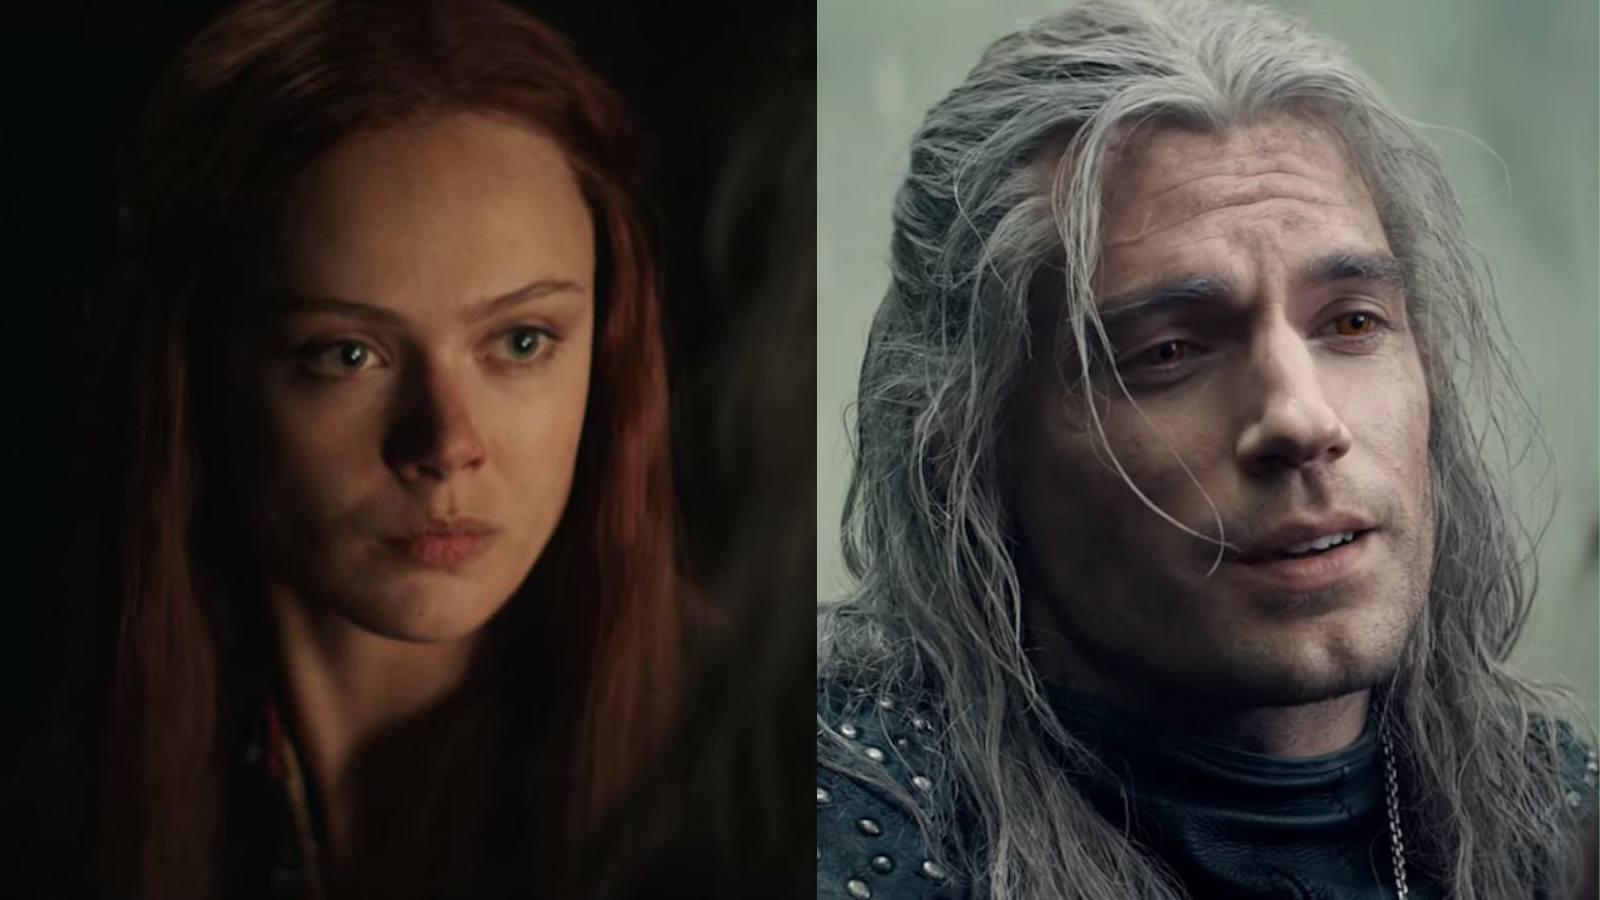 Frida and Henry in The Witcher